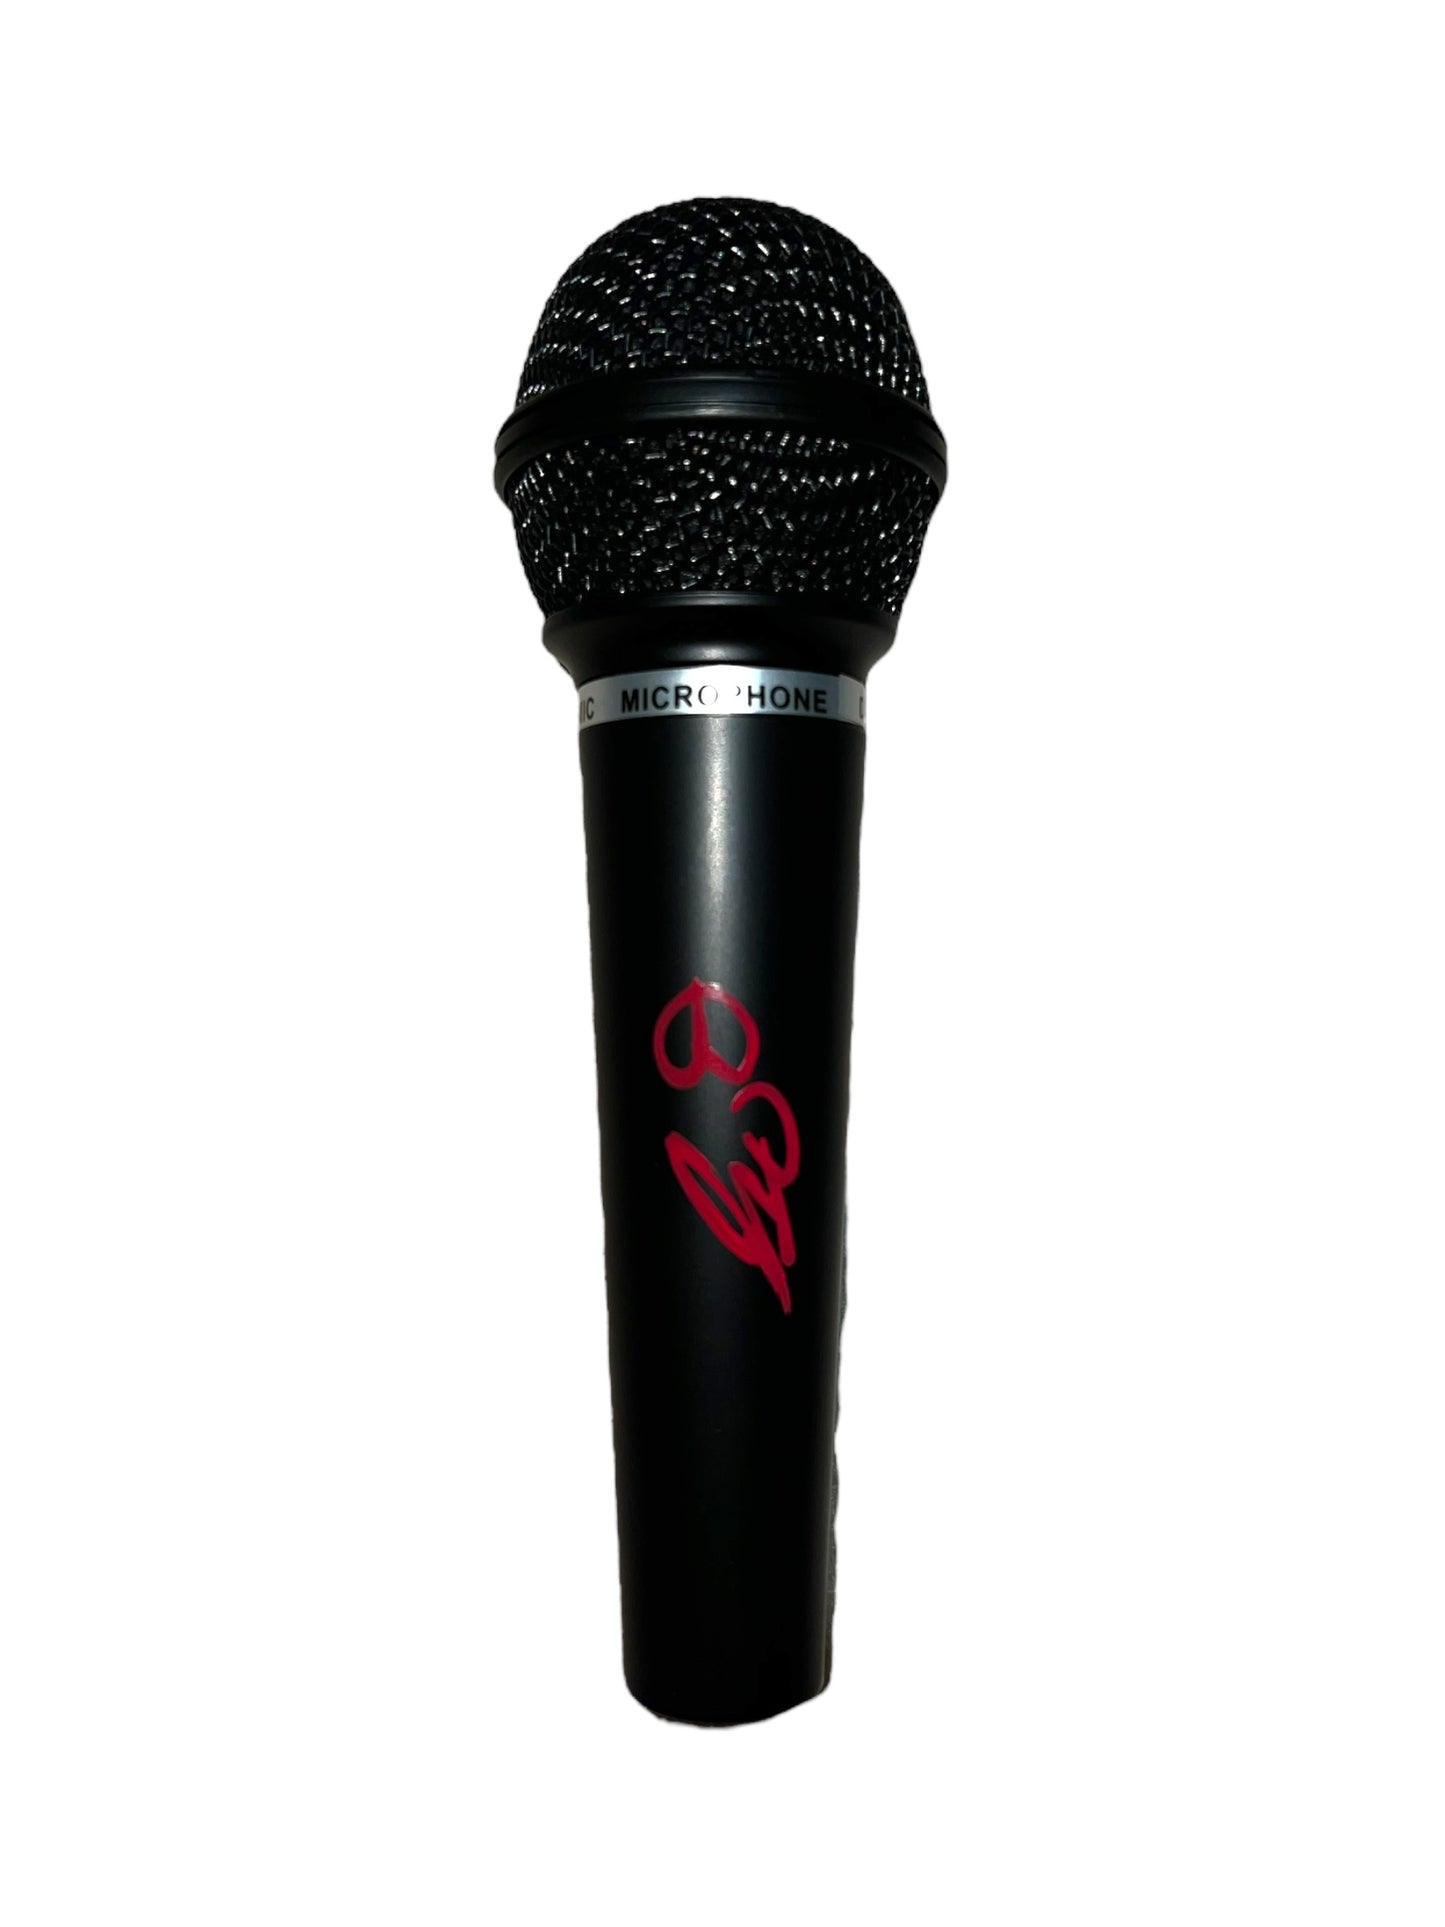 Teddy Swims Signed Microphone